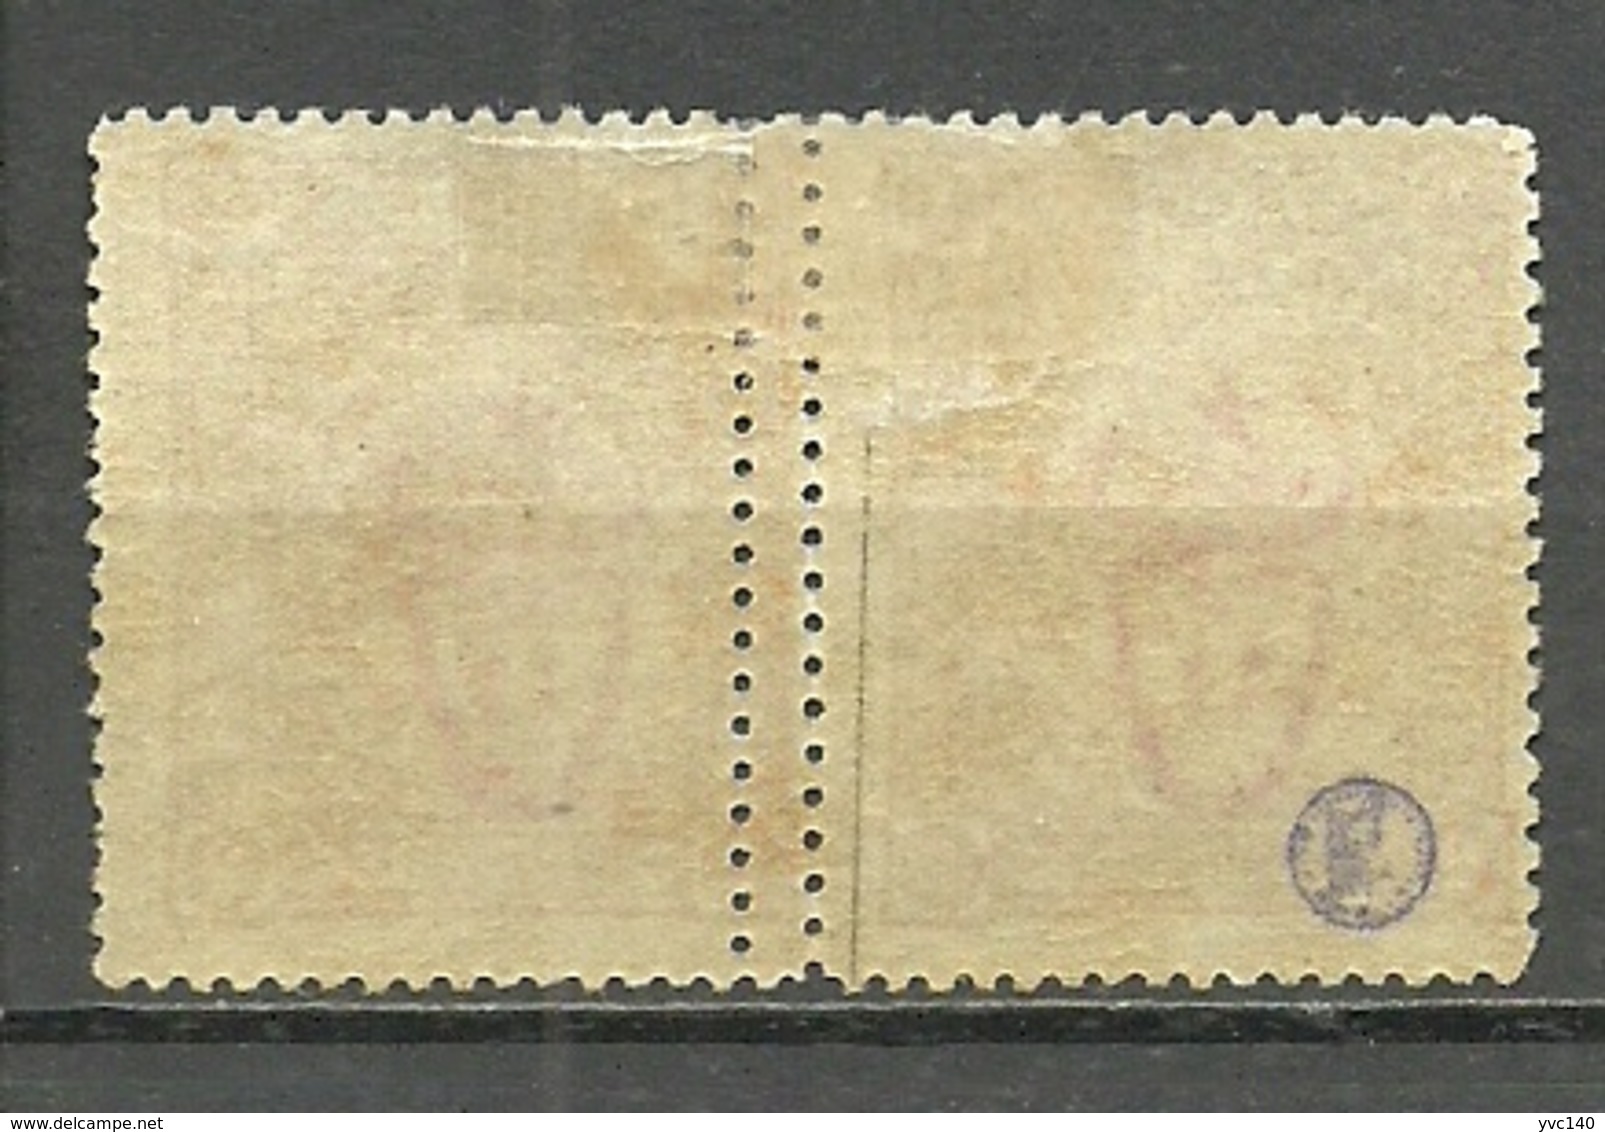 Turkey; 1917 Overprinted War Issue Stamp 2 K. ERROR "Double Perf." (Signed) - Neufs